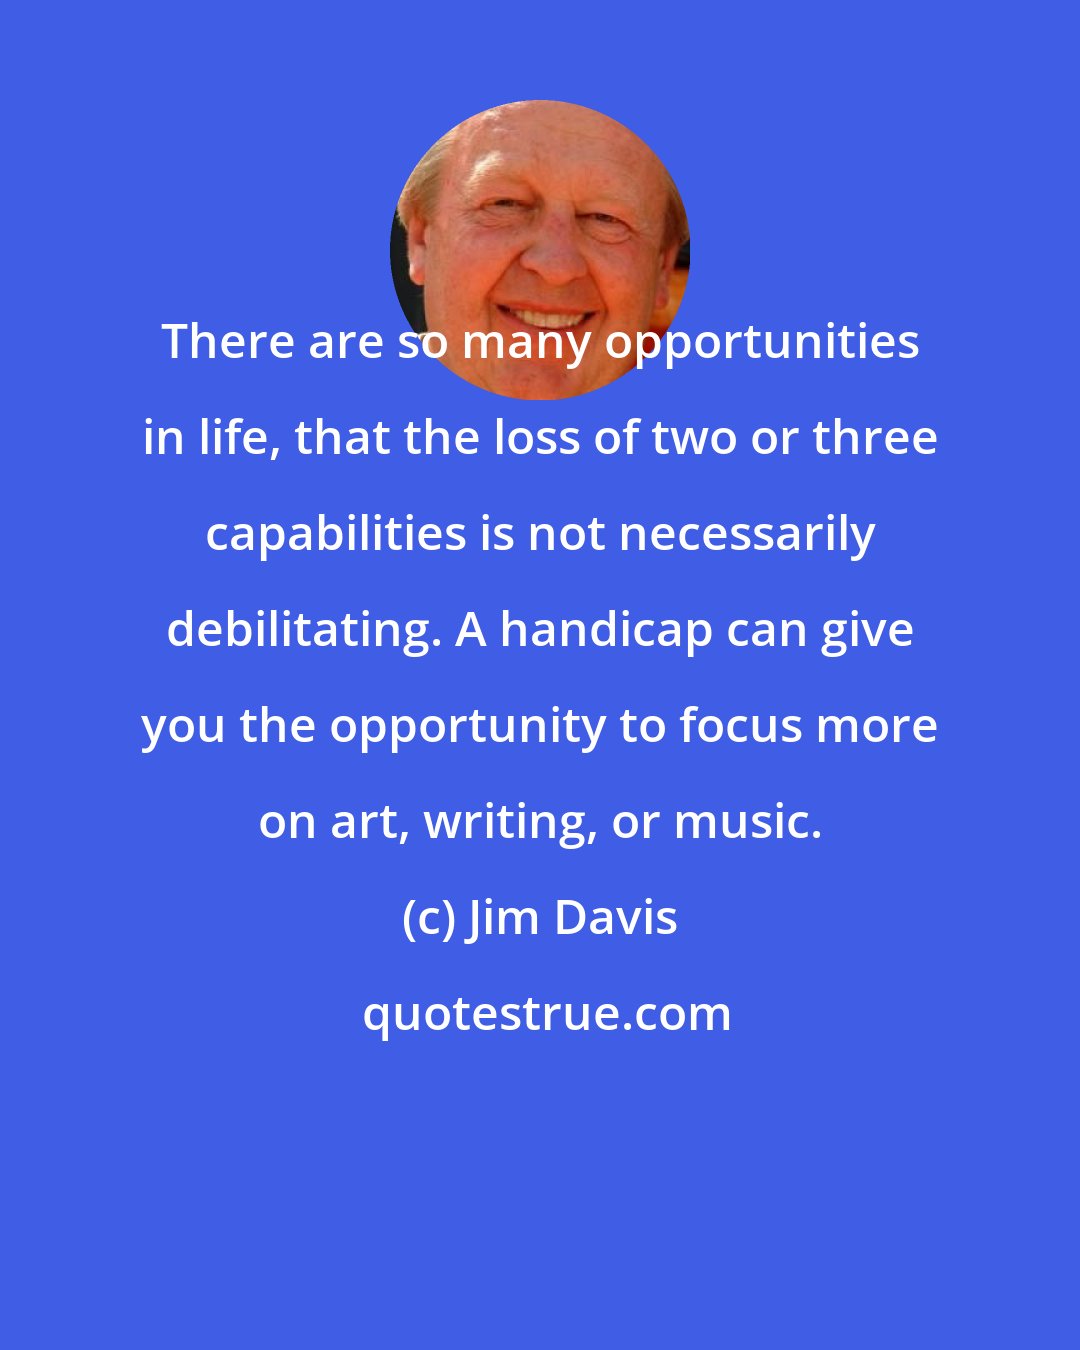 Jim Davis: There are so many opportunities in life, that the loss of two or three capabilities is not necessarily debilitating. A handicap can give you the opportunity to focus more on art, writing, or music.